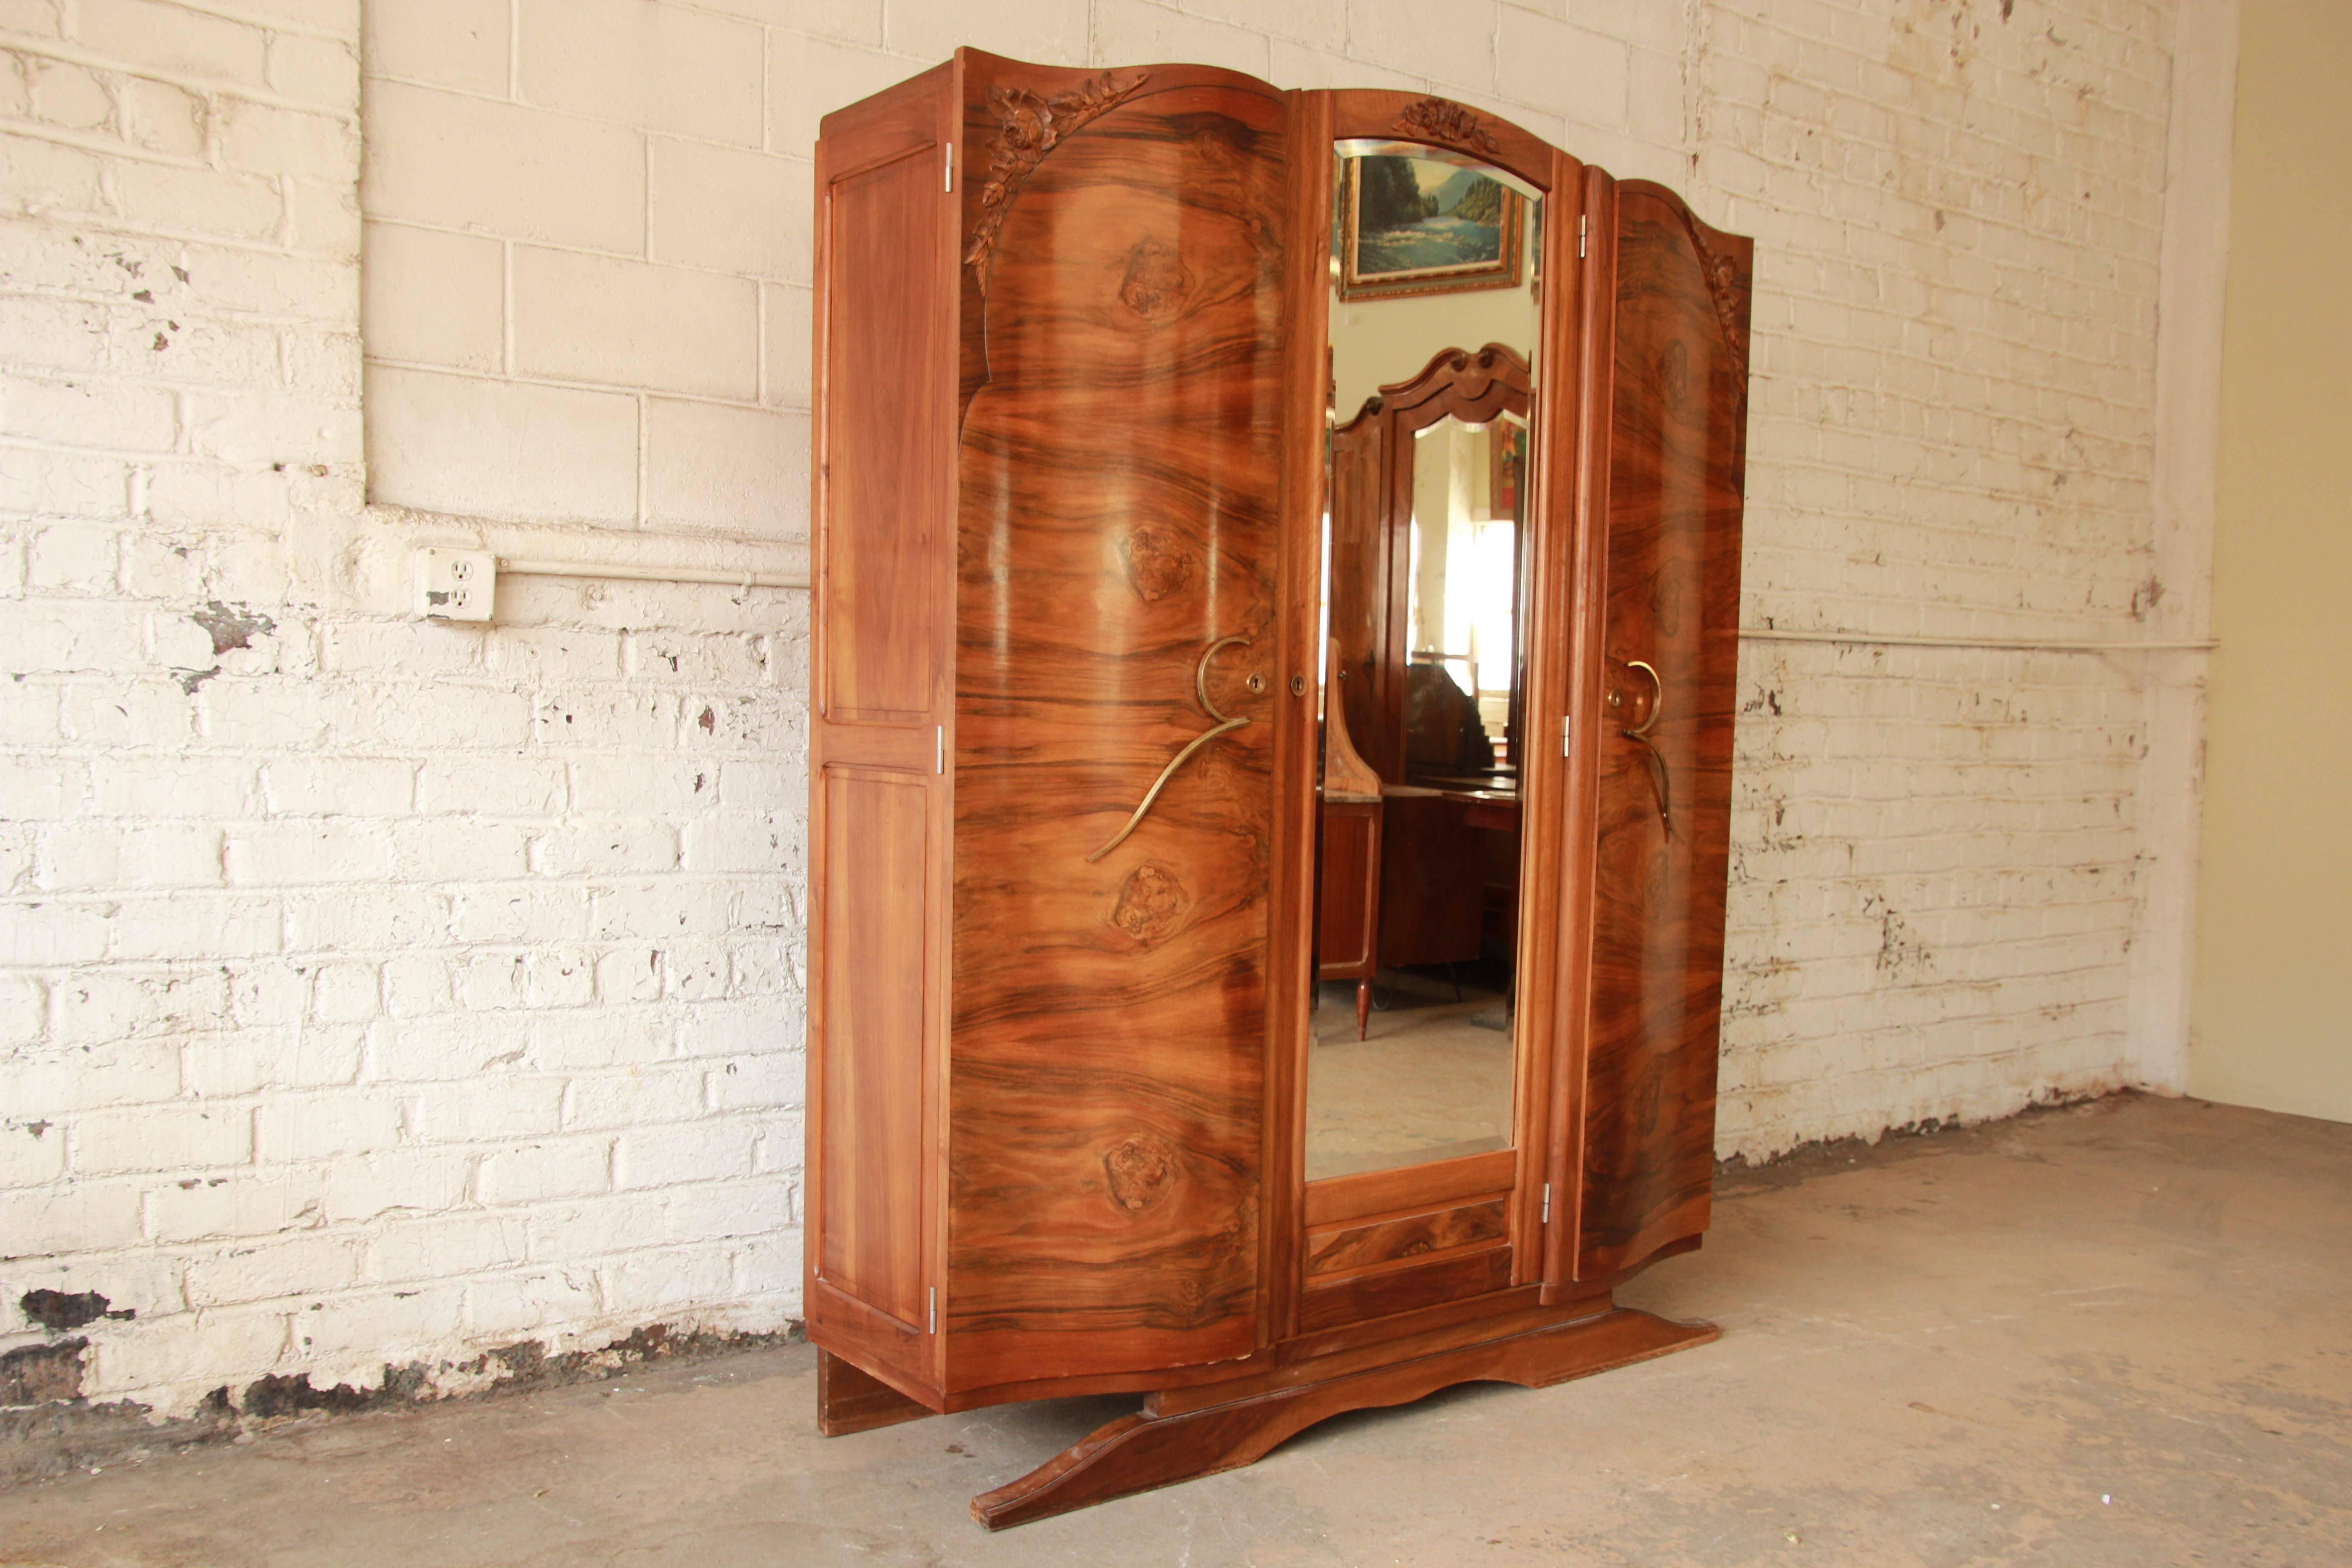 Exceptional 1930s French Art Deco knockdown wardrobe. The wardrobe features stunning burl wood grain, hand-carved details and a large beveled mirror. It offers ample room for storage, with open shelving throughout and a single dovetailed drawer. The